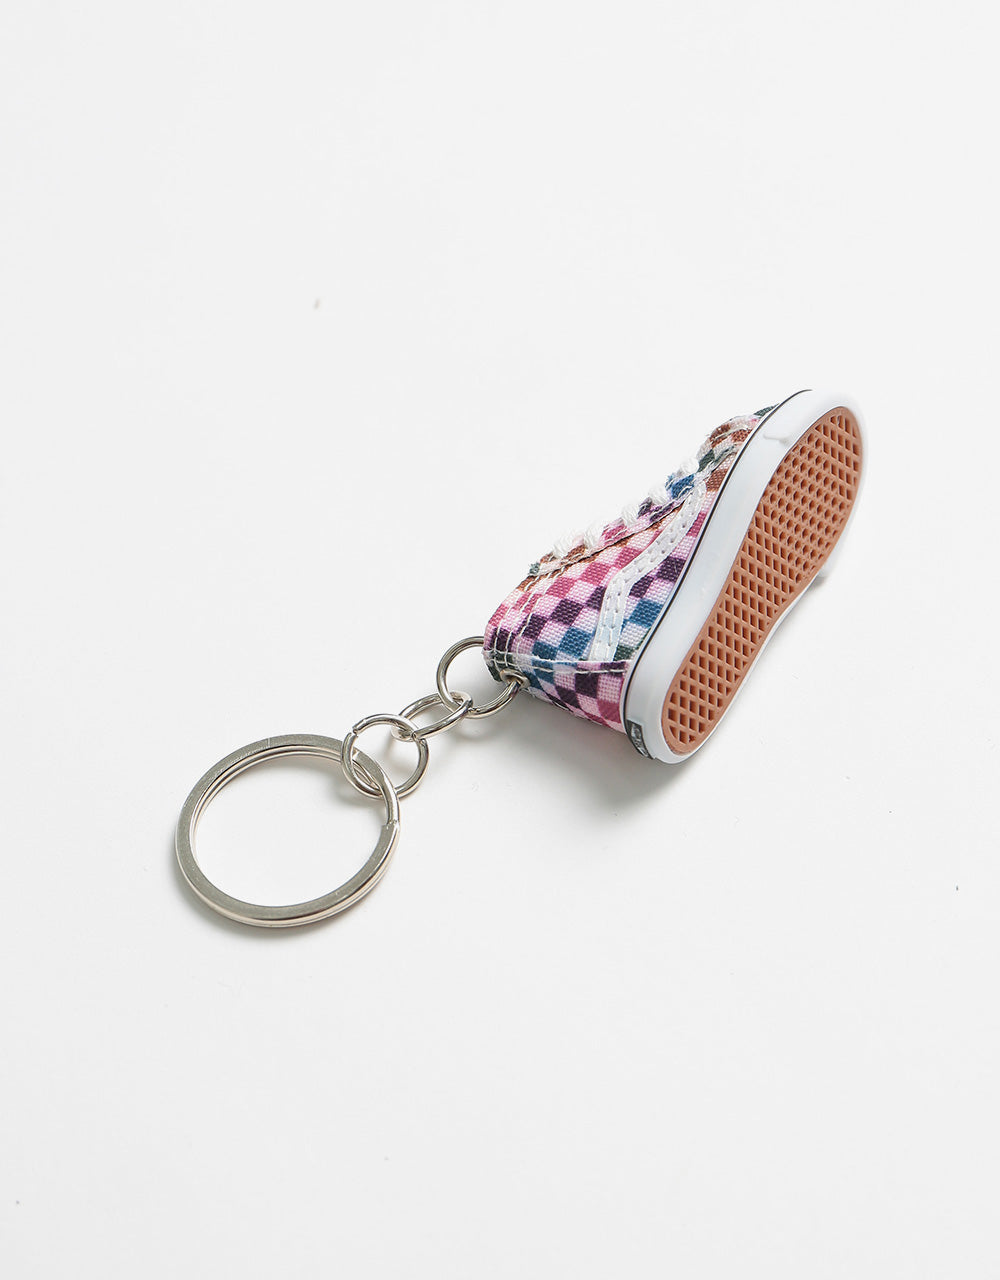 Vans Womens Sk8-Hi Keychain - Dusted Check